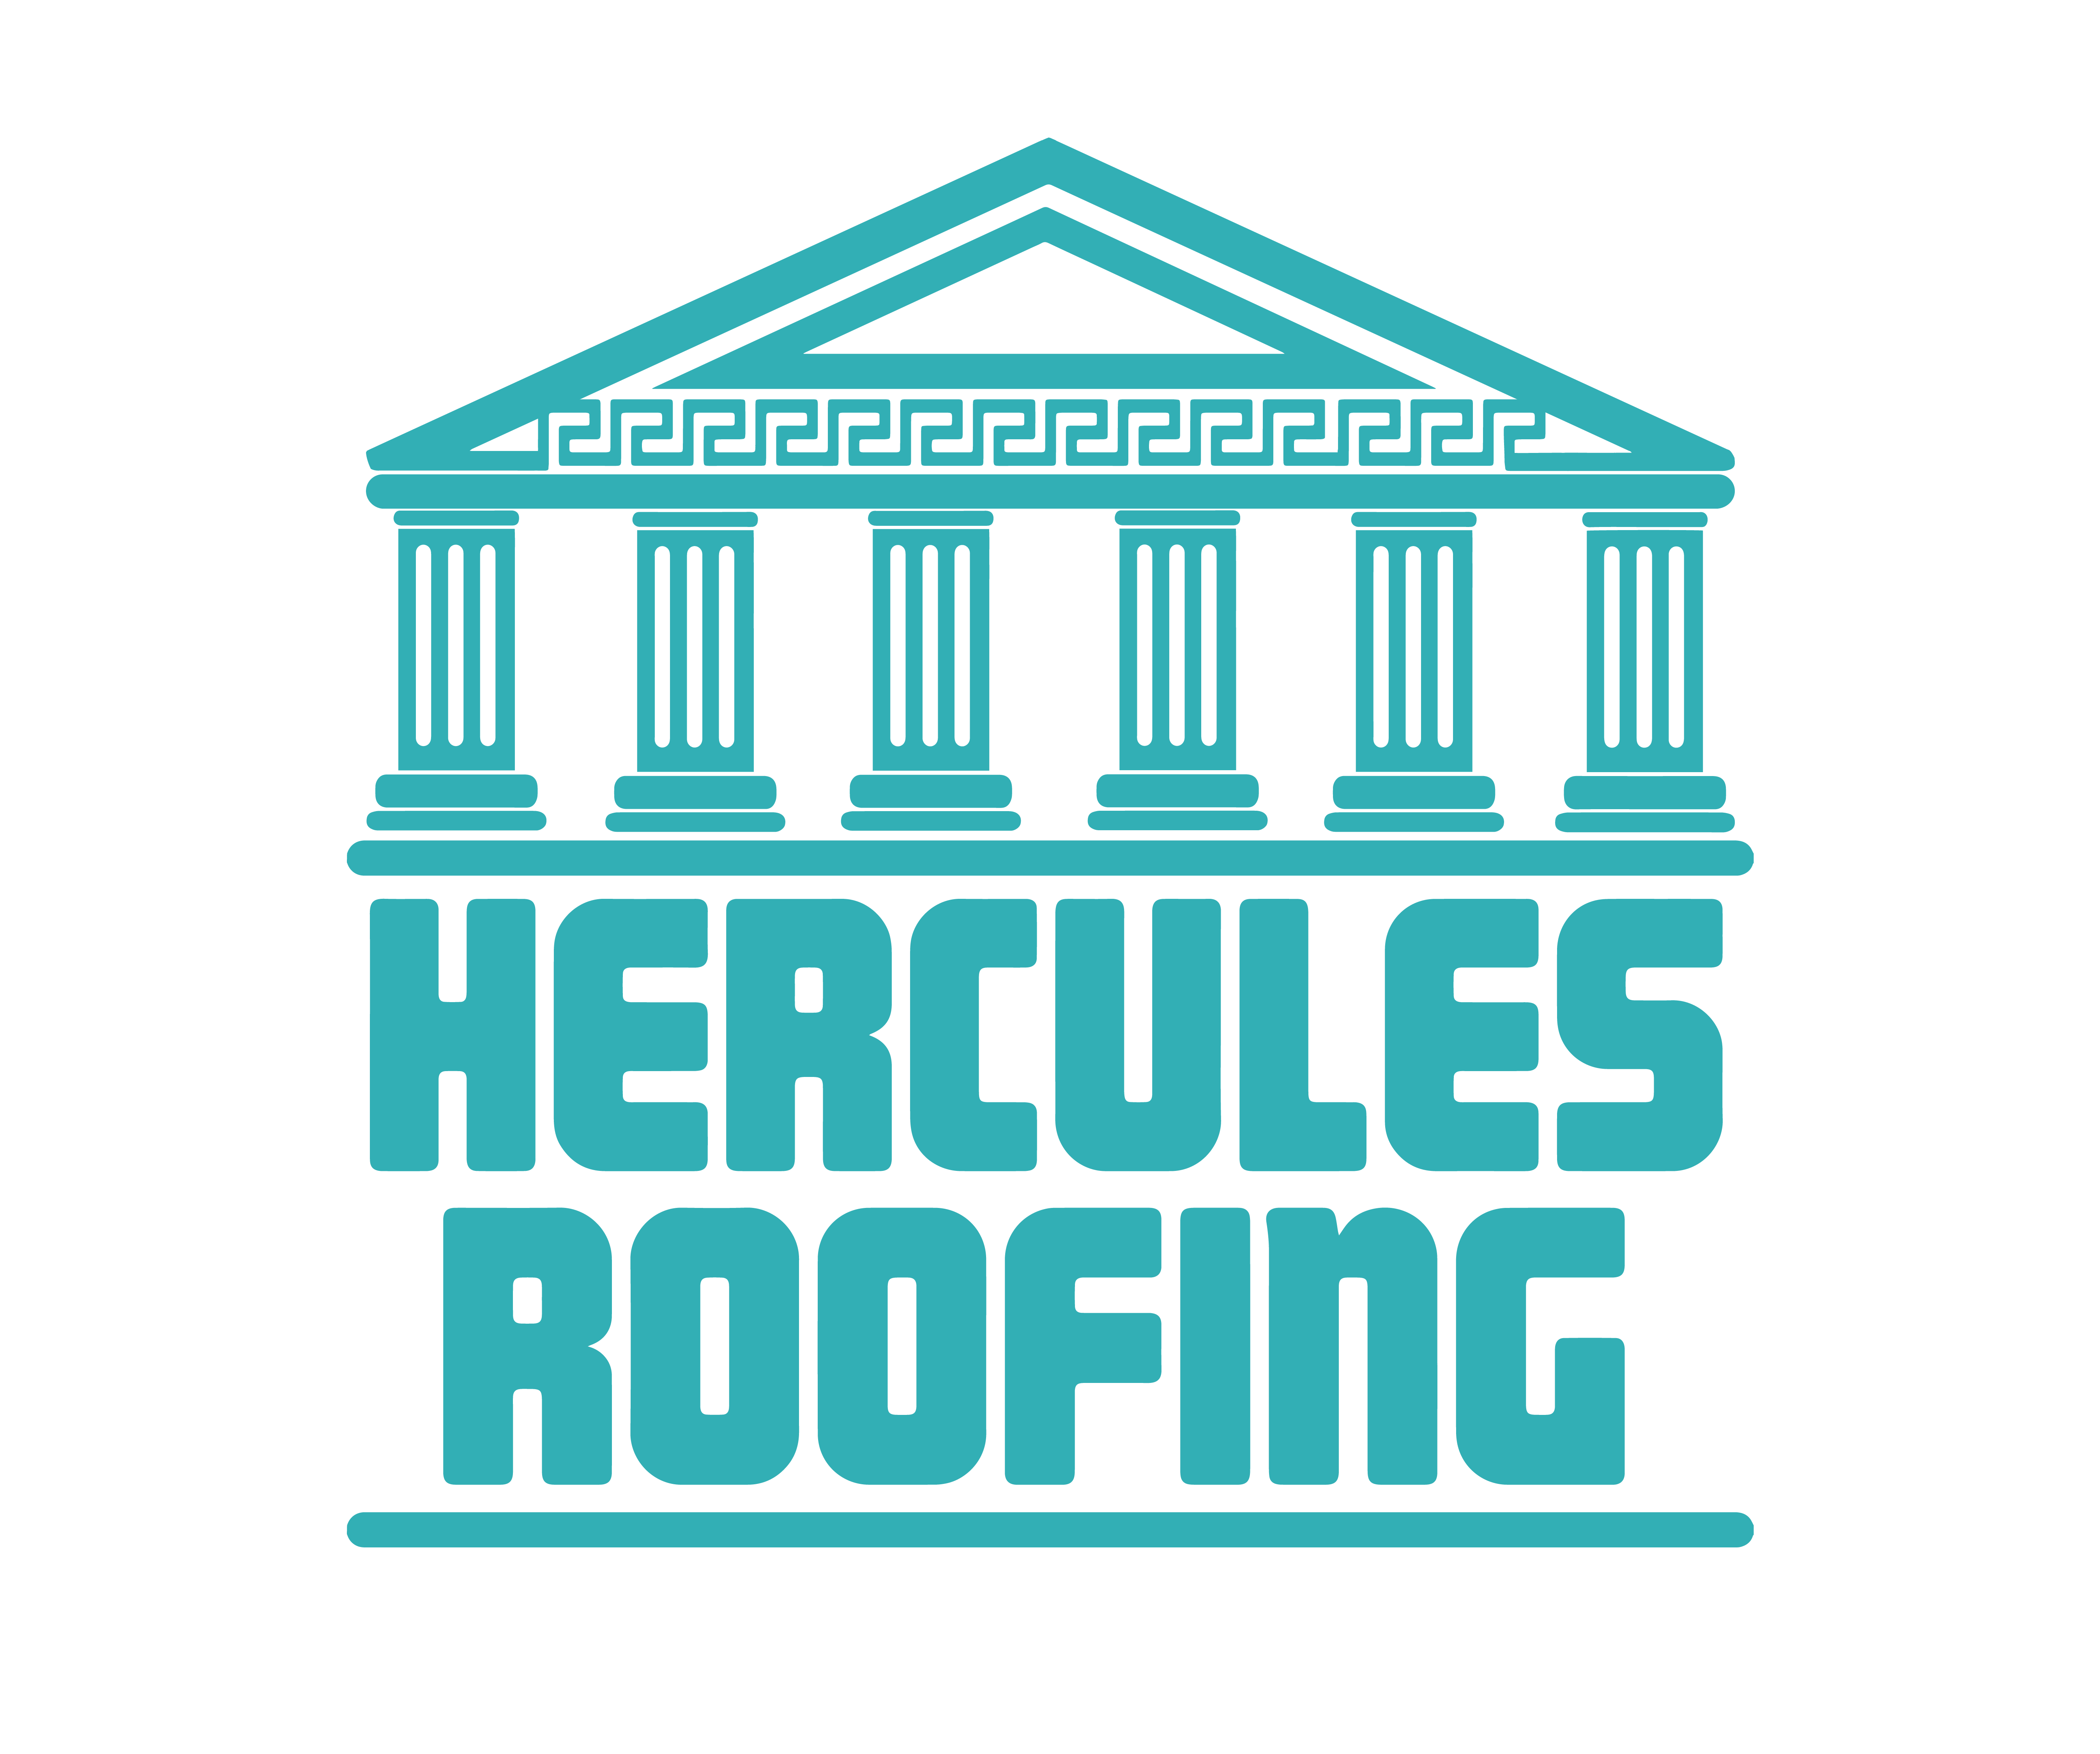 Hercules Roofing Boasts as the Best-in-Class Roofing Company in Huntington Beach